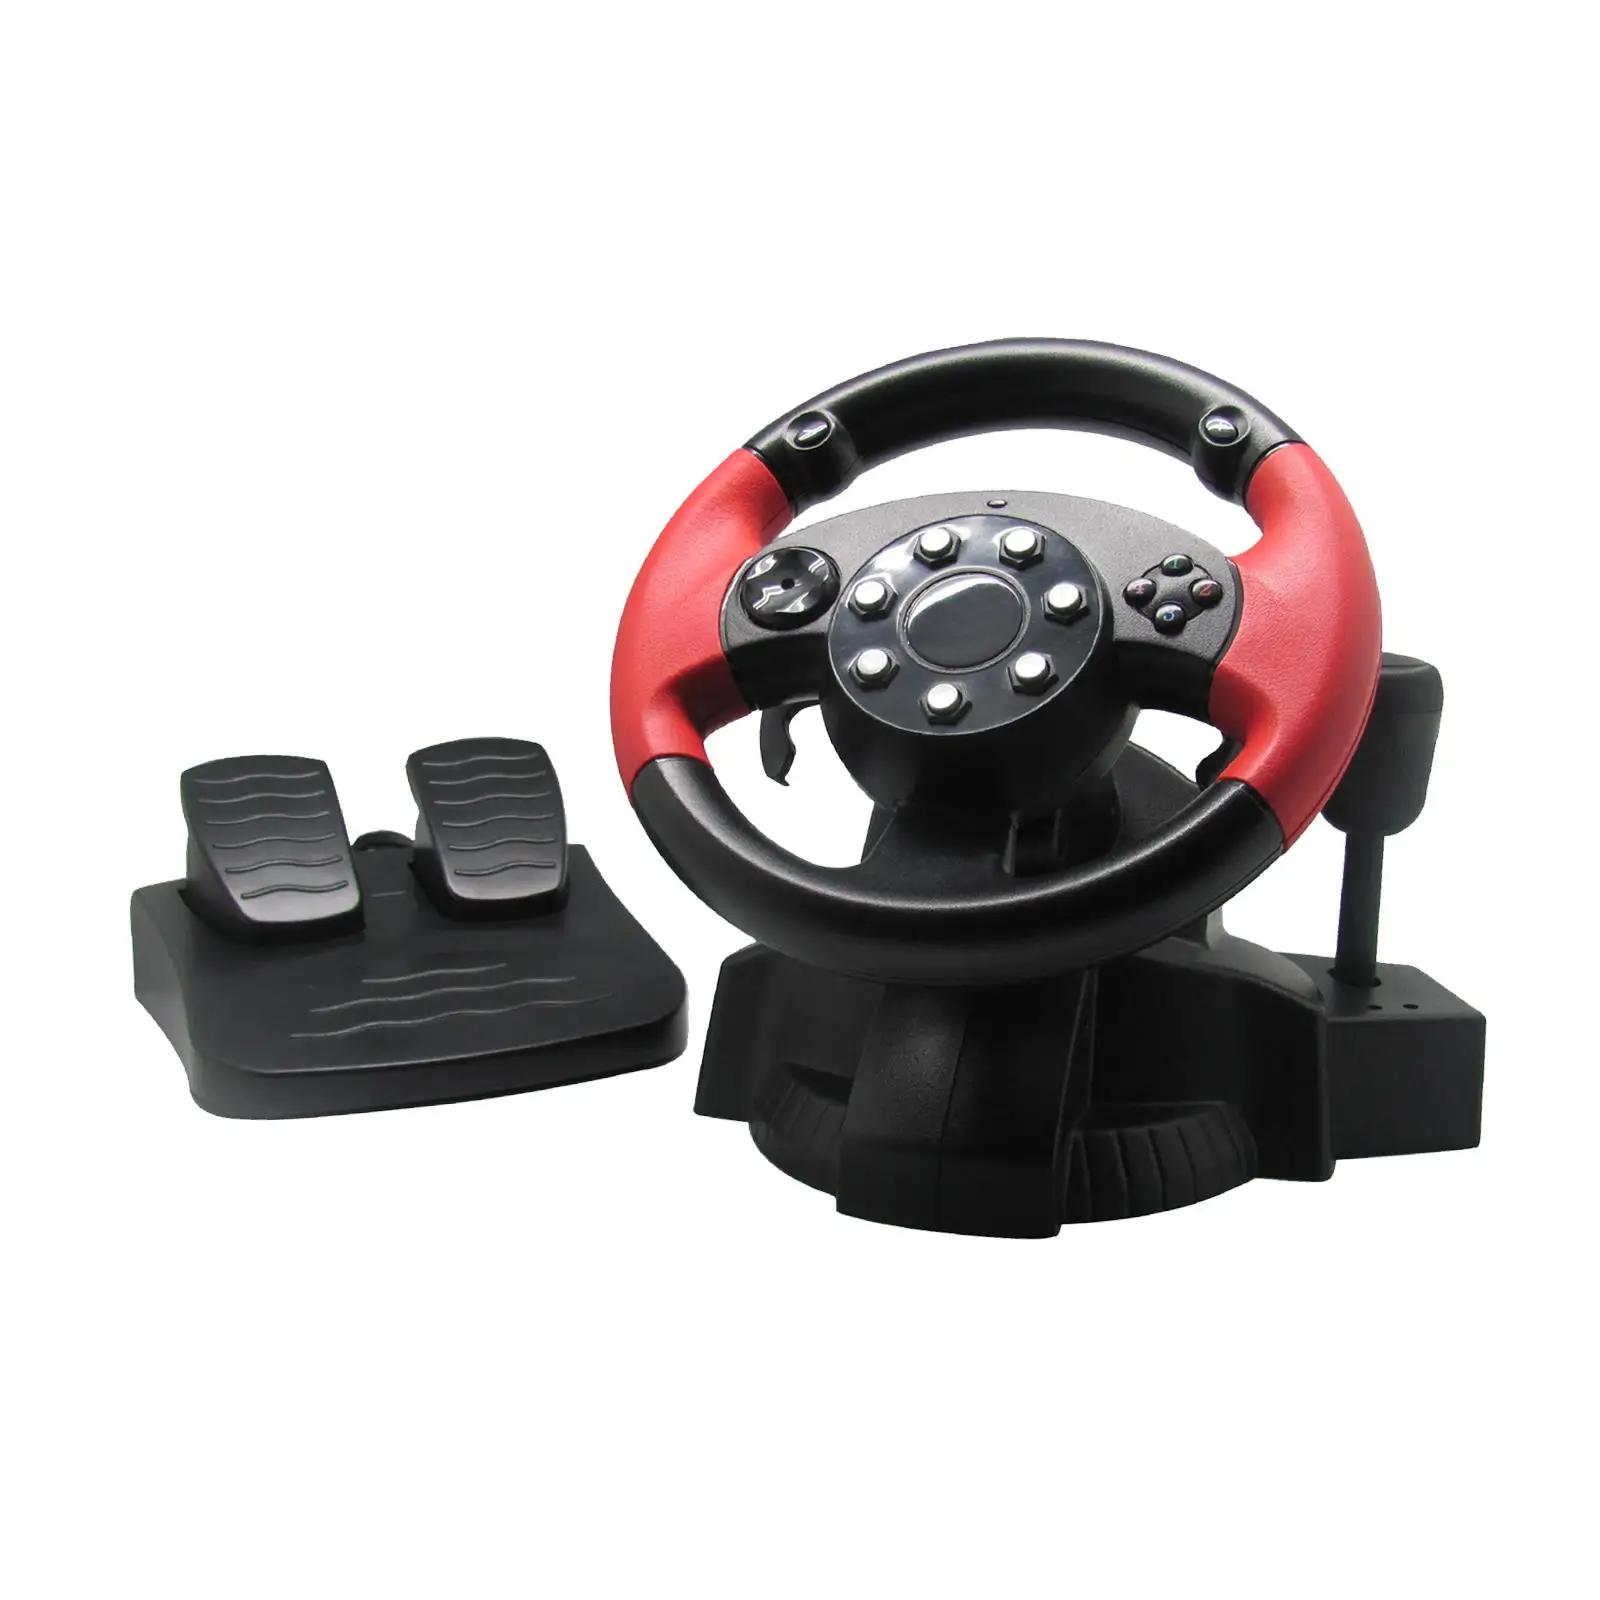 Race Steering Wheel with Floor Pedals Automatic Centering Function with Vibration Racing Steering Wheel Racing Driving Wheel